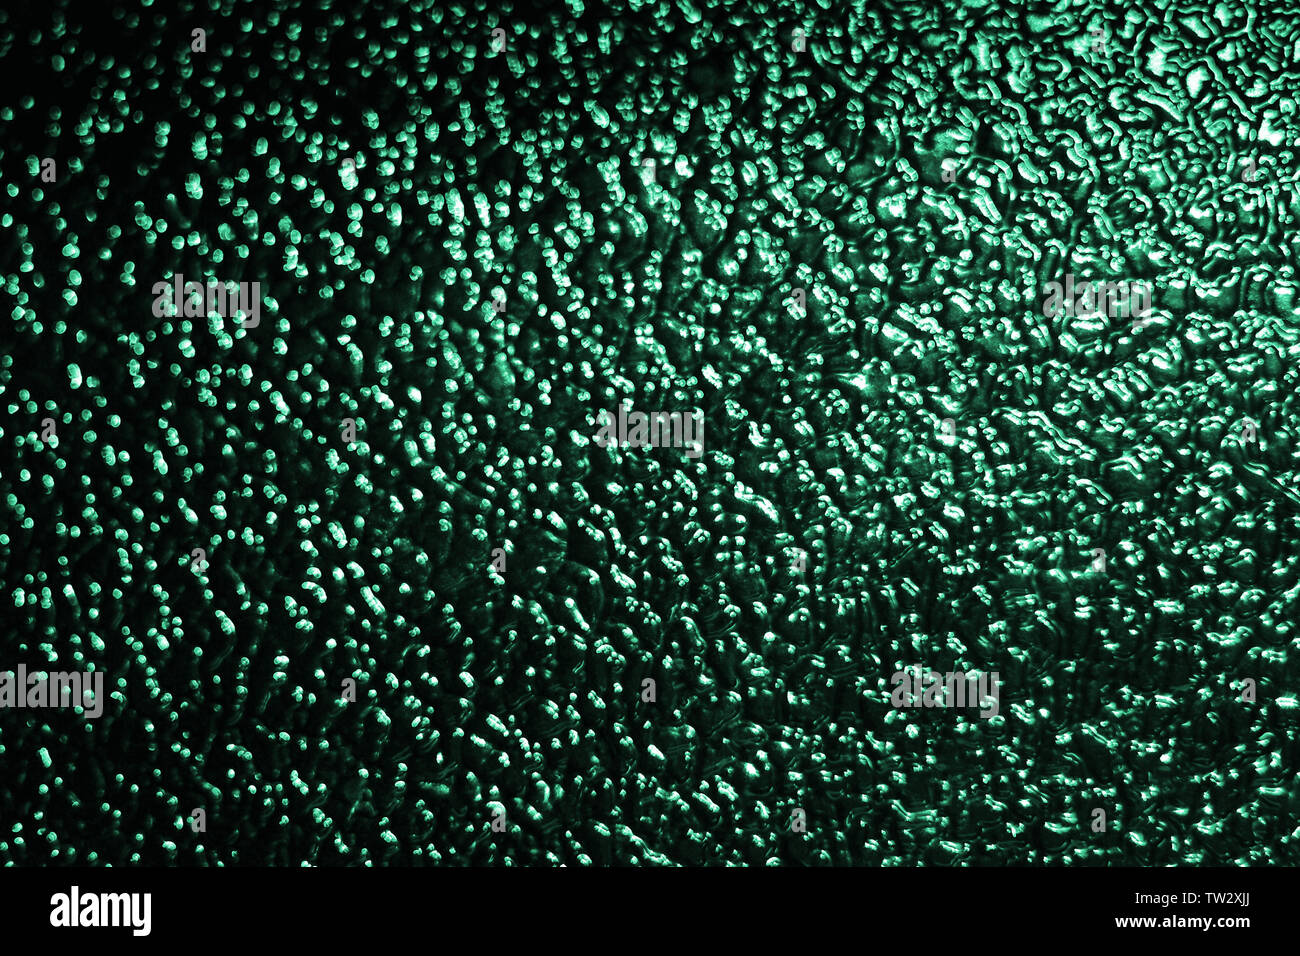 Abstract background of defocused mint green lights on dark background, glimpses of moon light on textured glass or water surface Stock Photo